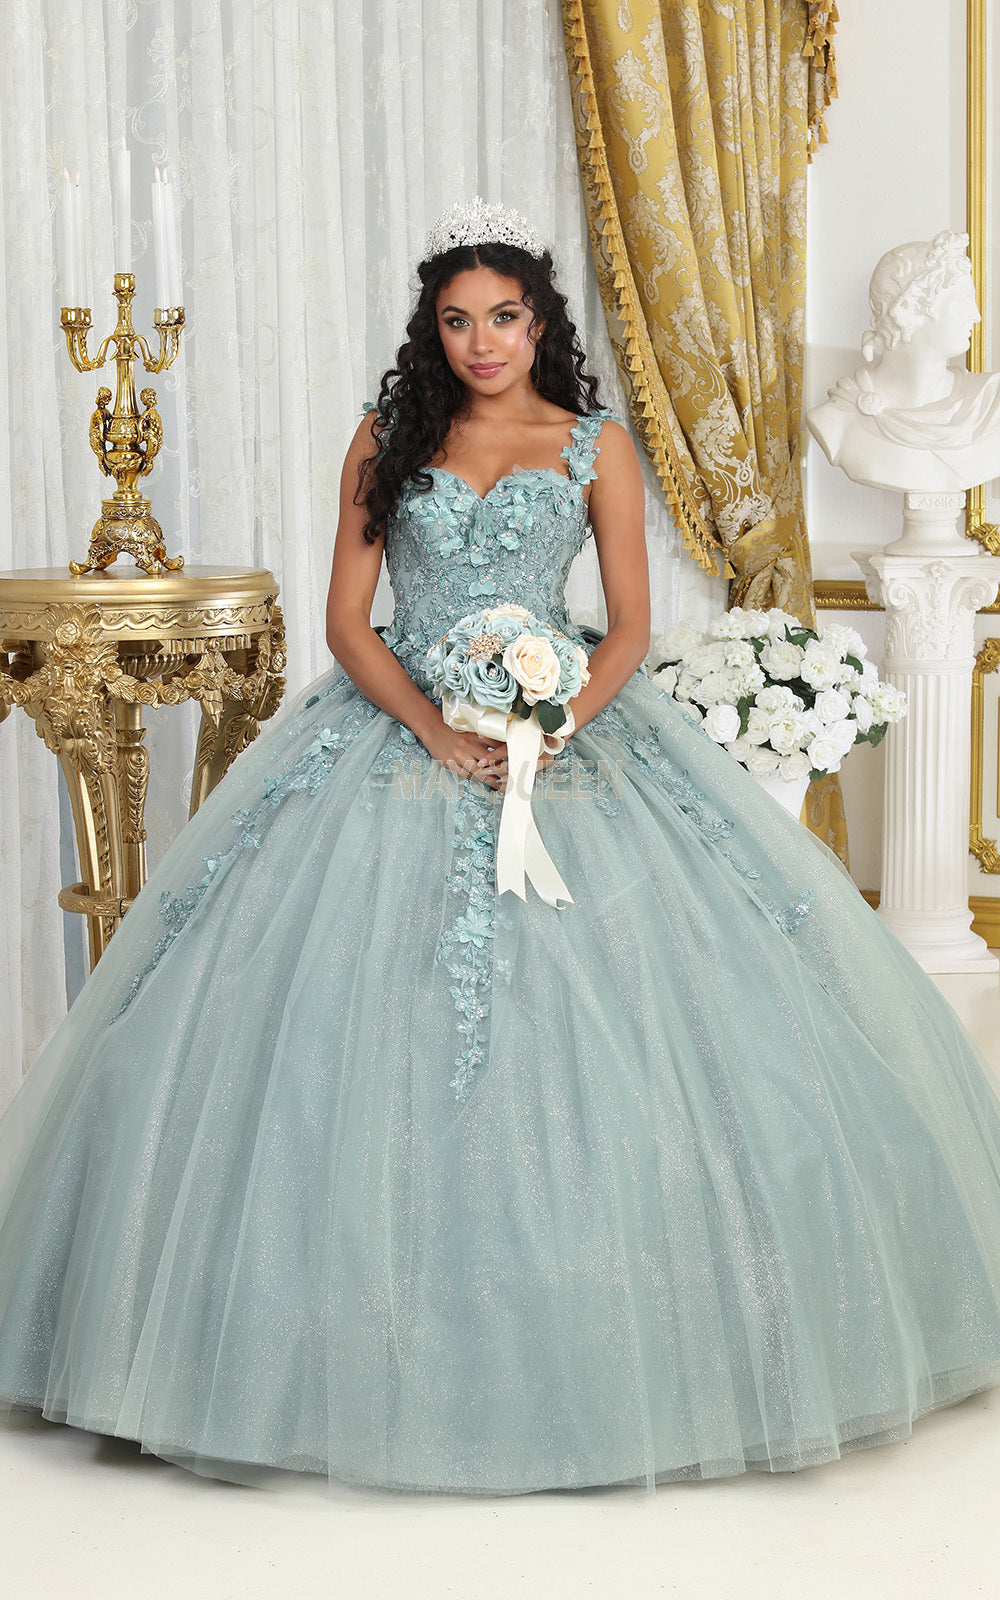 May Queen LK235 - Embroidered Gown